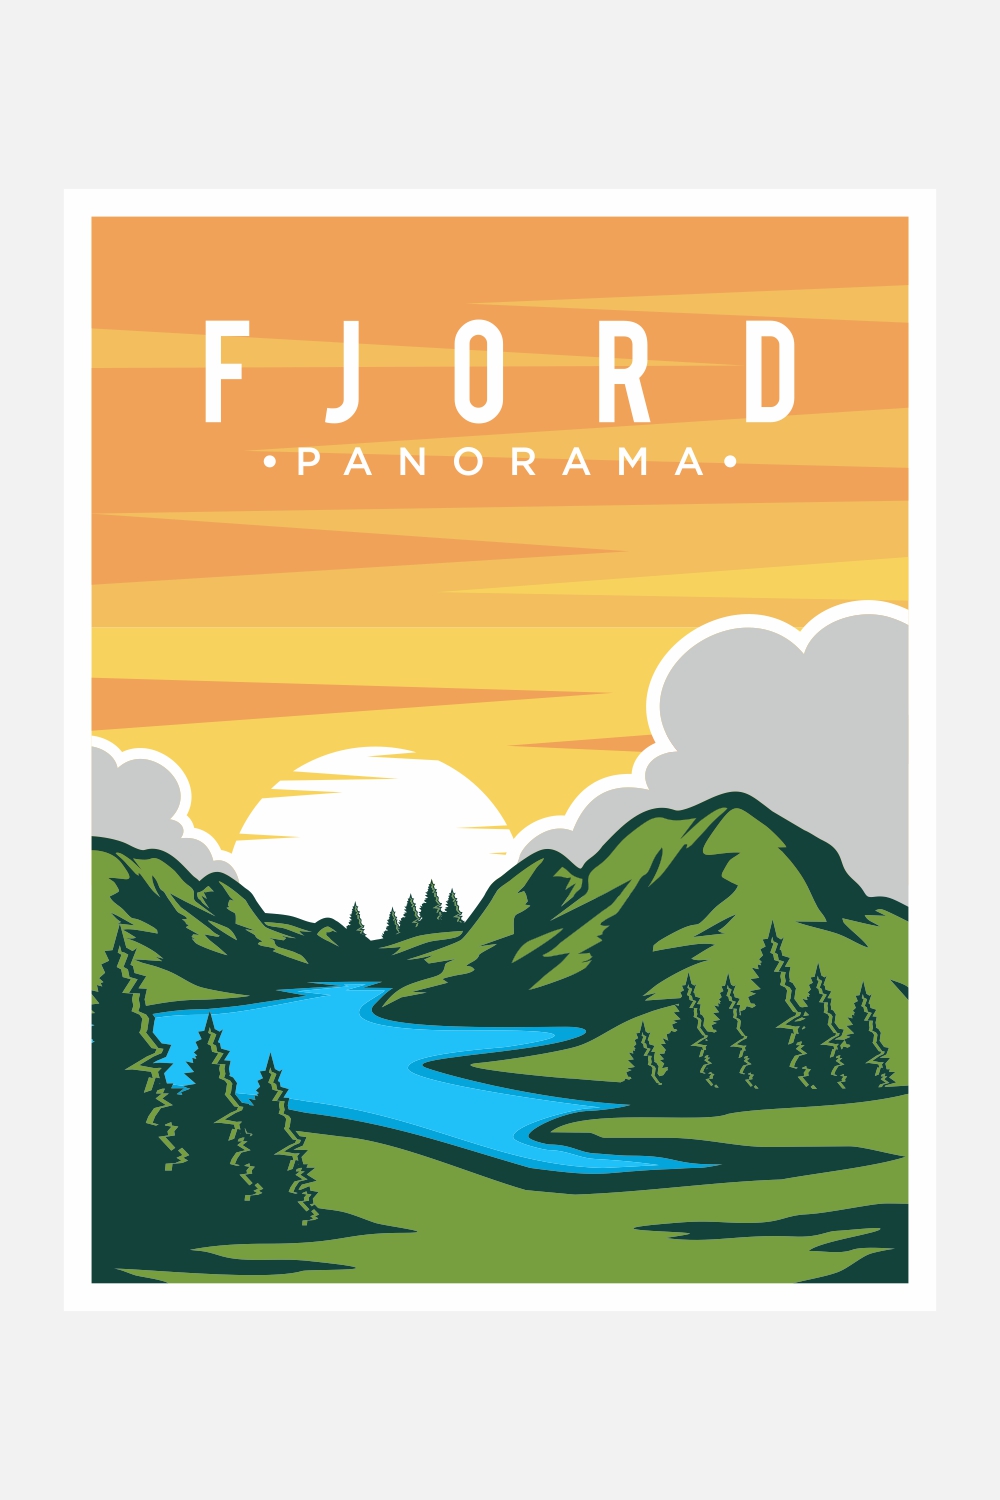 Fjord panorama poster vector illustration desig – Only $7 pinterest preview image.